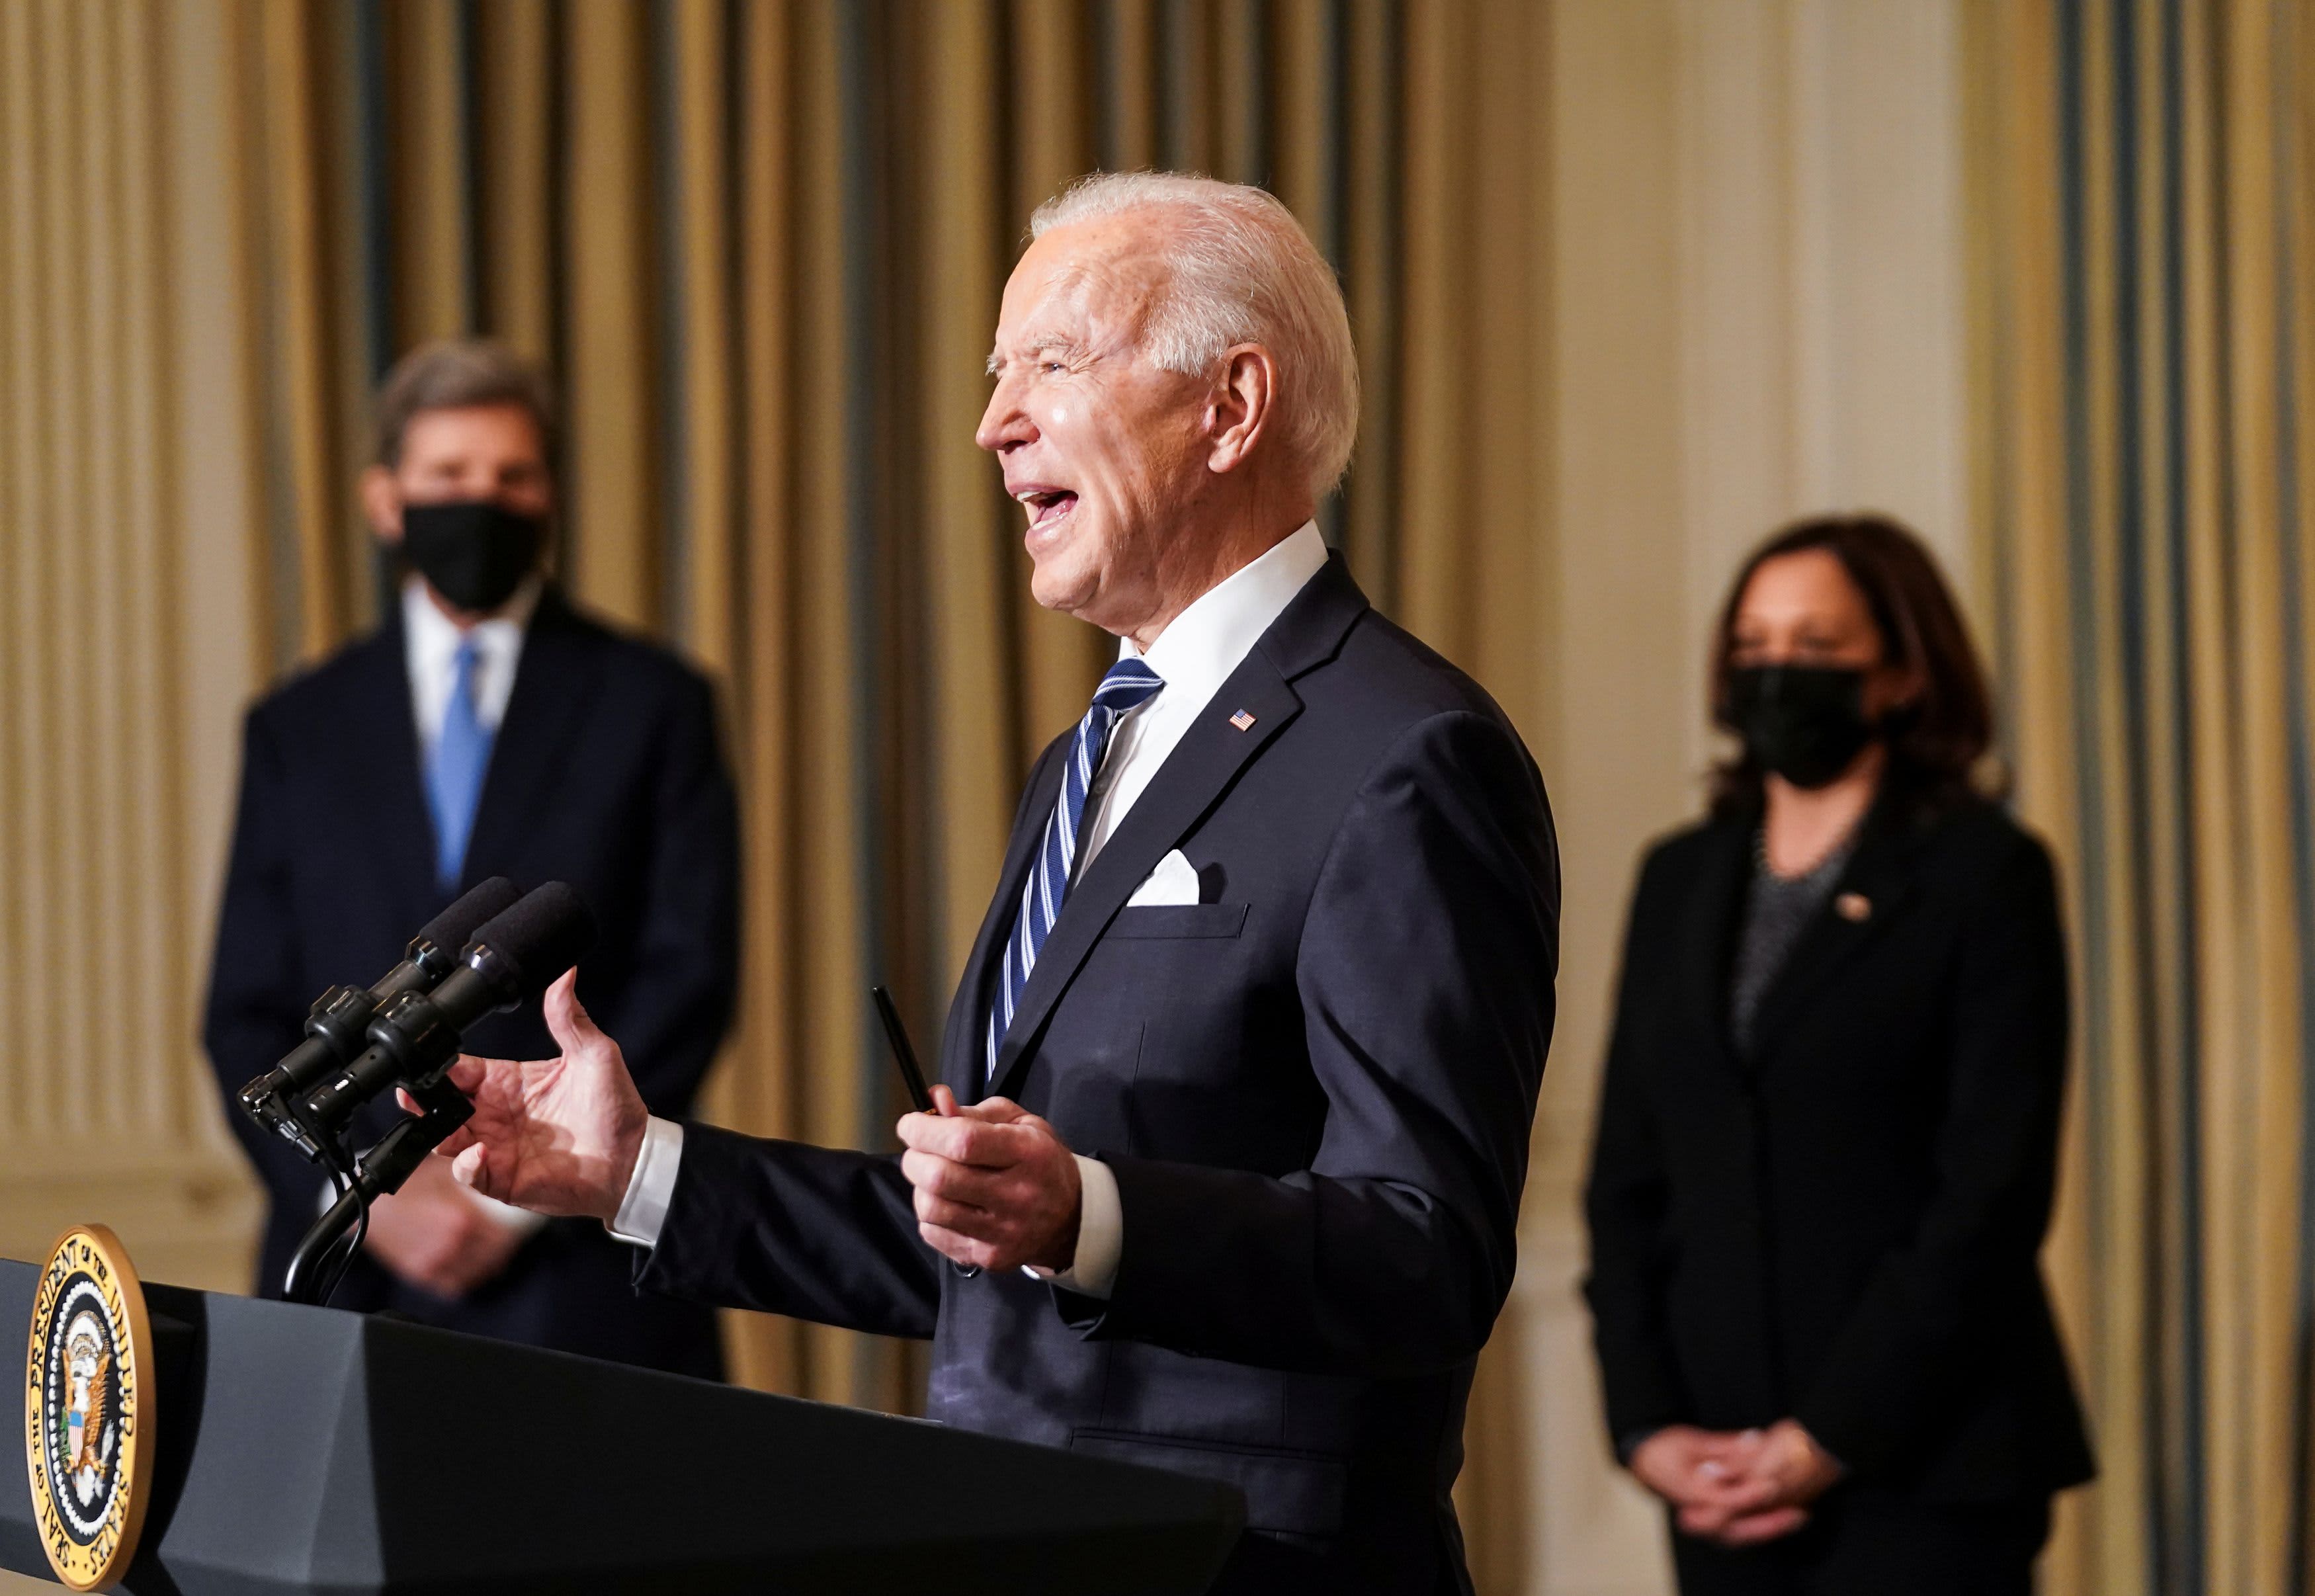 Biden's Policy on Climate Change